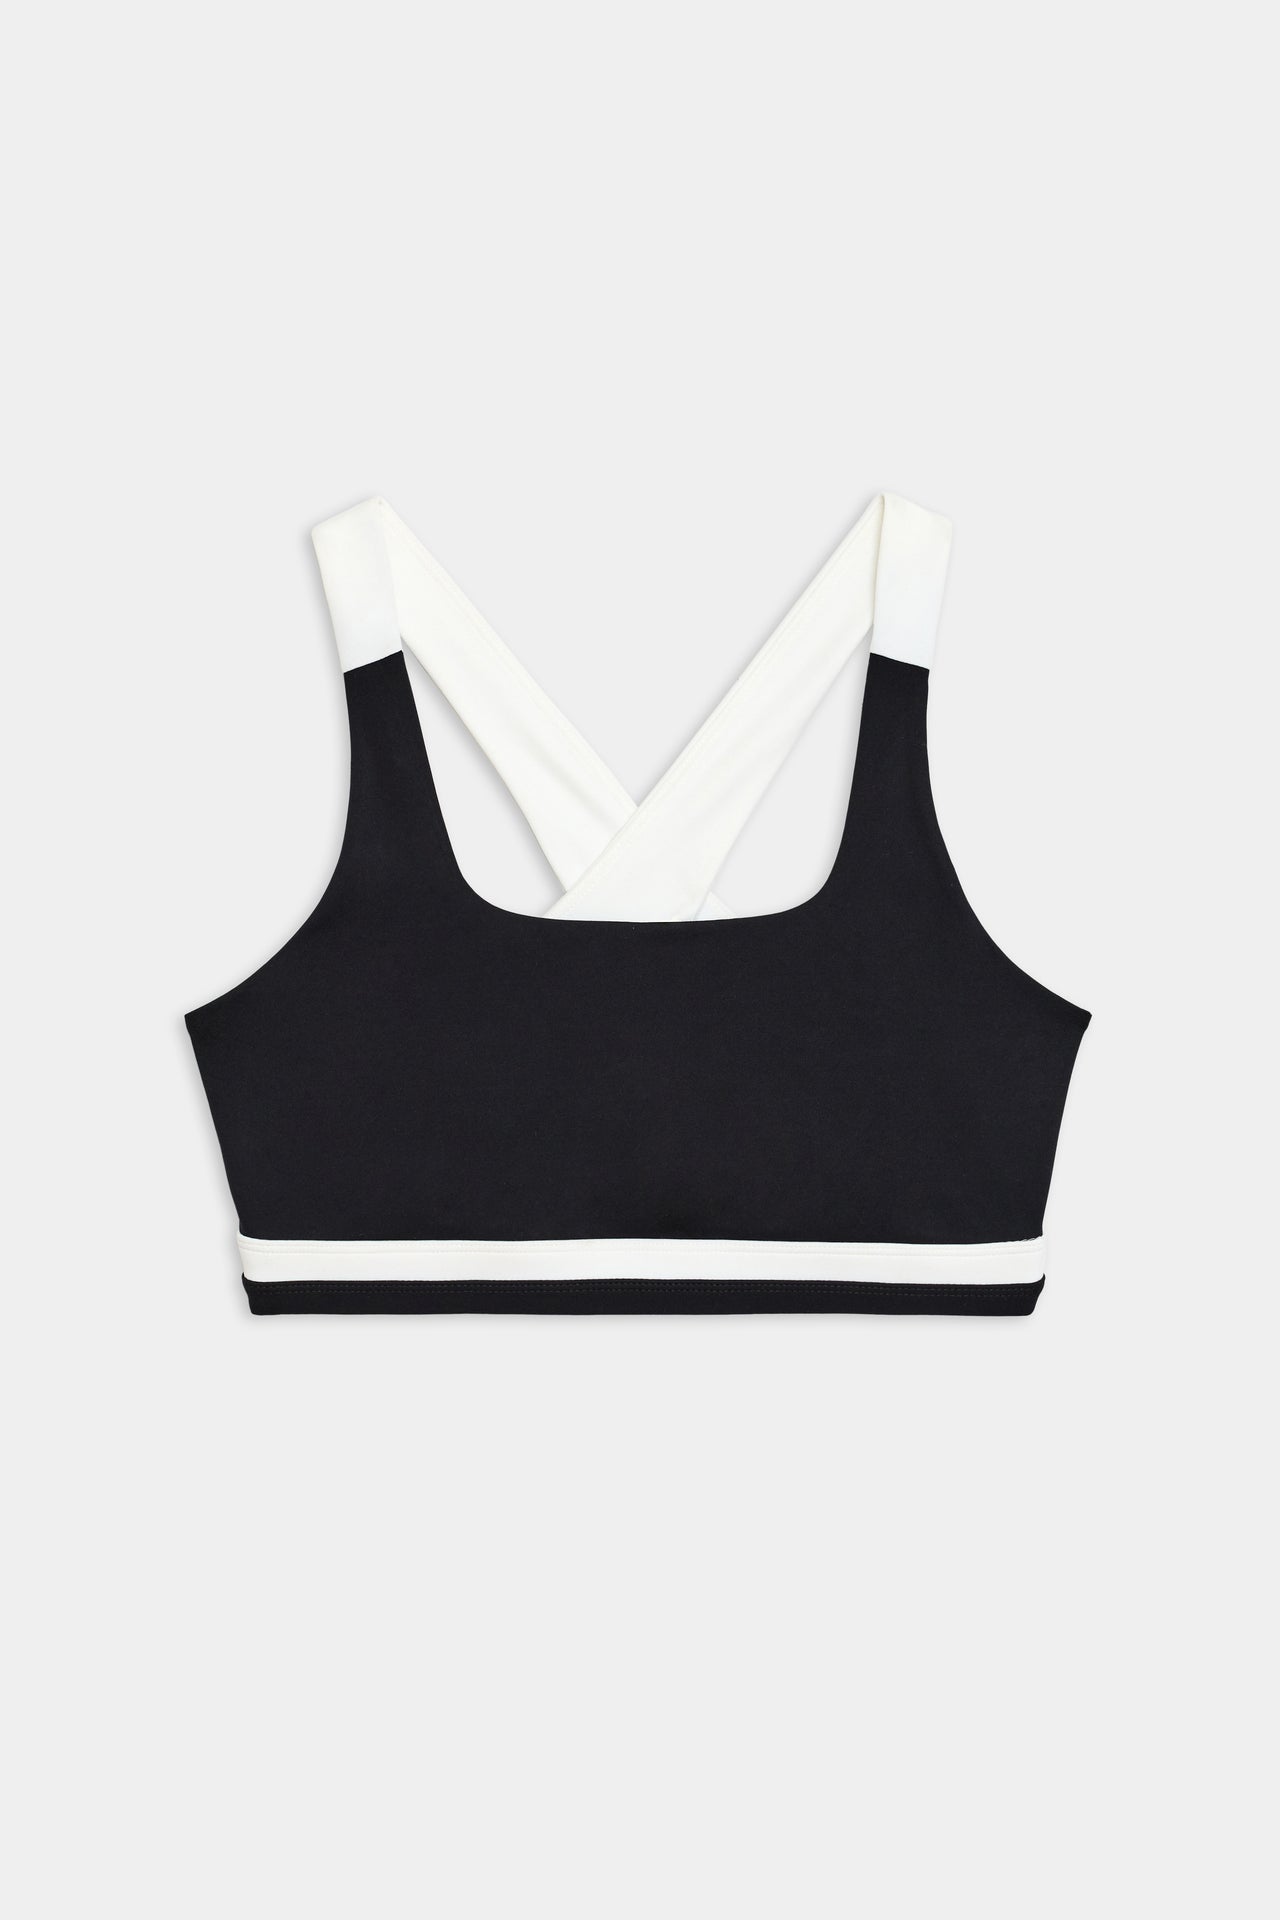 A stylish SPLITS59 Miles Rigor Bra - Black/White designed for workouts, offering exceptional support.